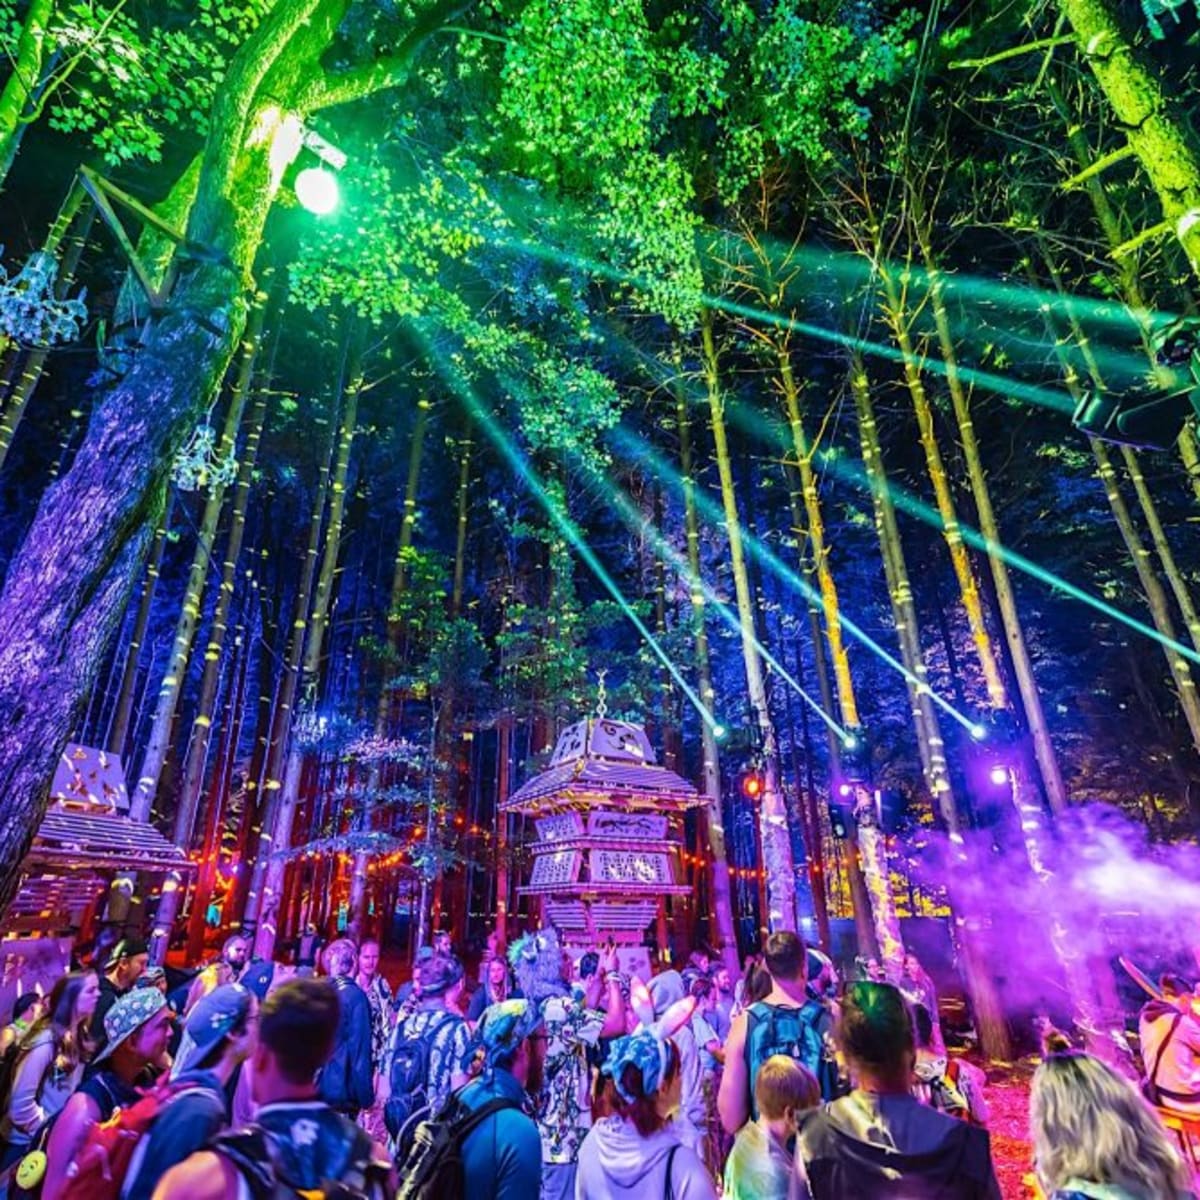 Electric Forest Cuts Programming Down To One Weekend in 2019  -  The Latest Electronic Dance Music News, Reviews & Artists